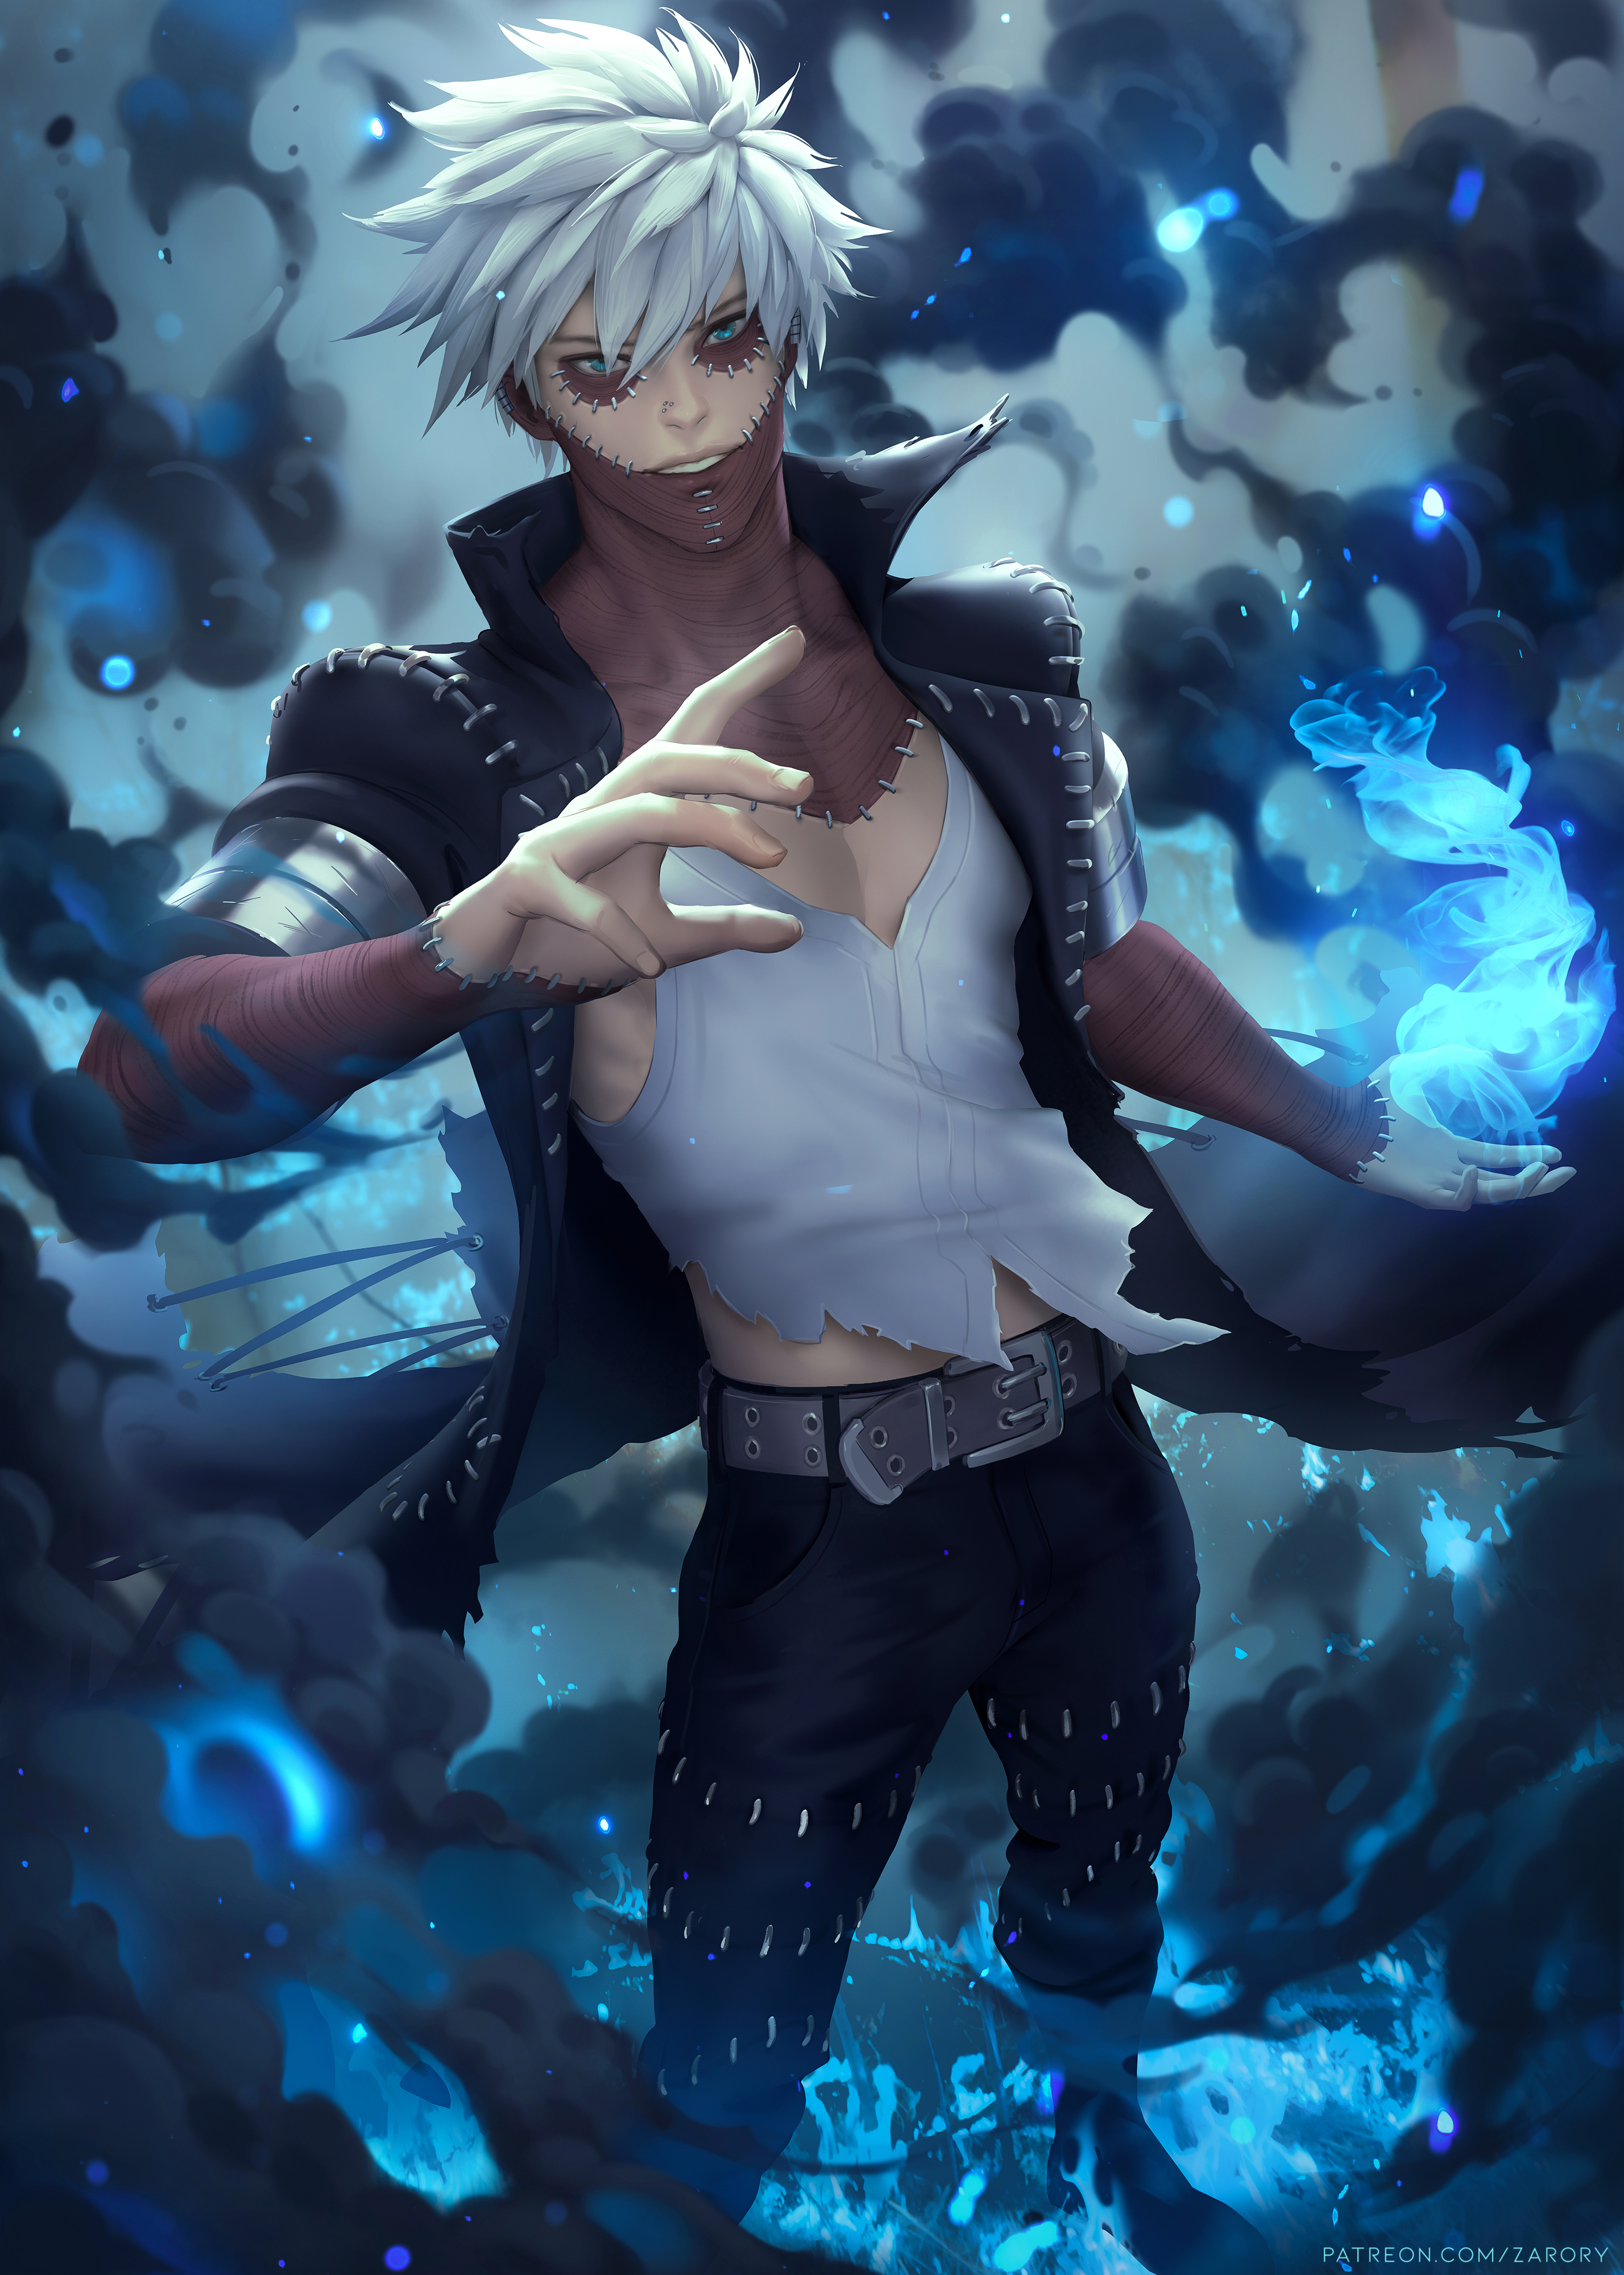 Anime 2856x4000 Dabi Boku no Hero Academia anime anime boys artwork drawing fan art Zarory blue flames fire burning white hair portrait display standing looking at viewer short hair watermarked blue eyes scars stitches belt